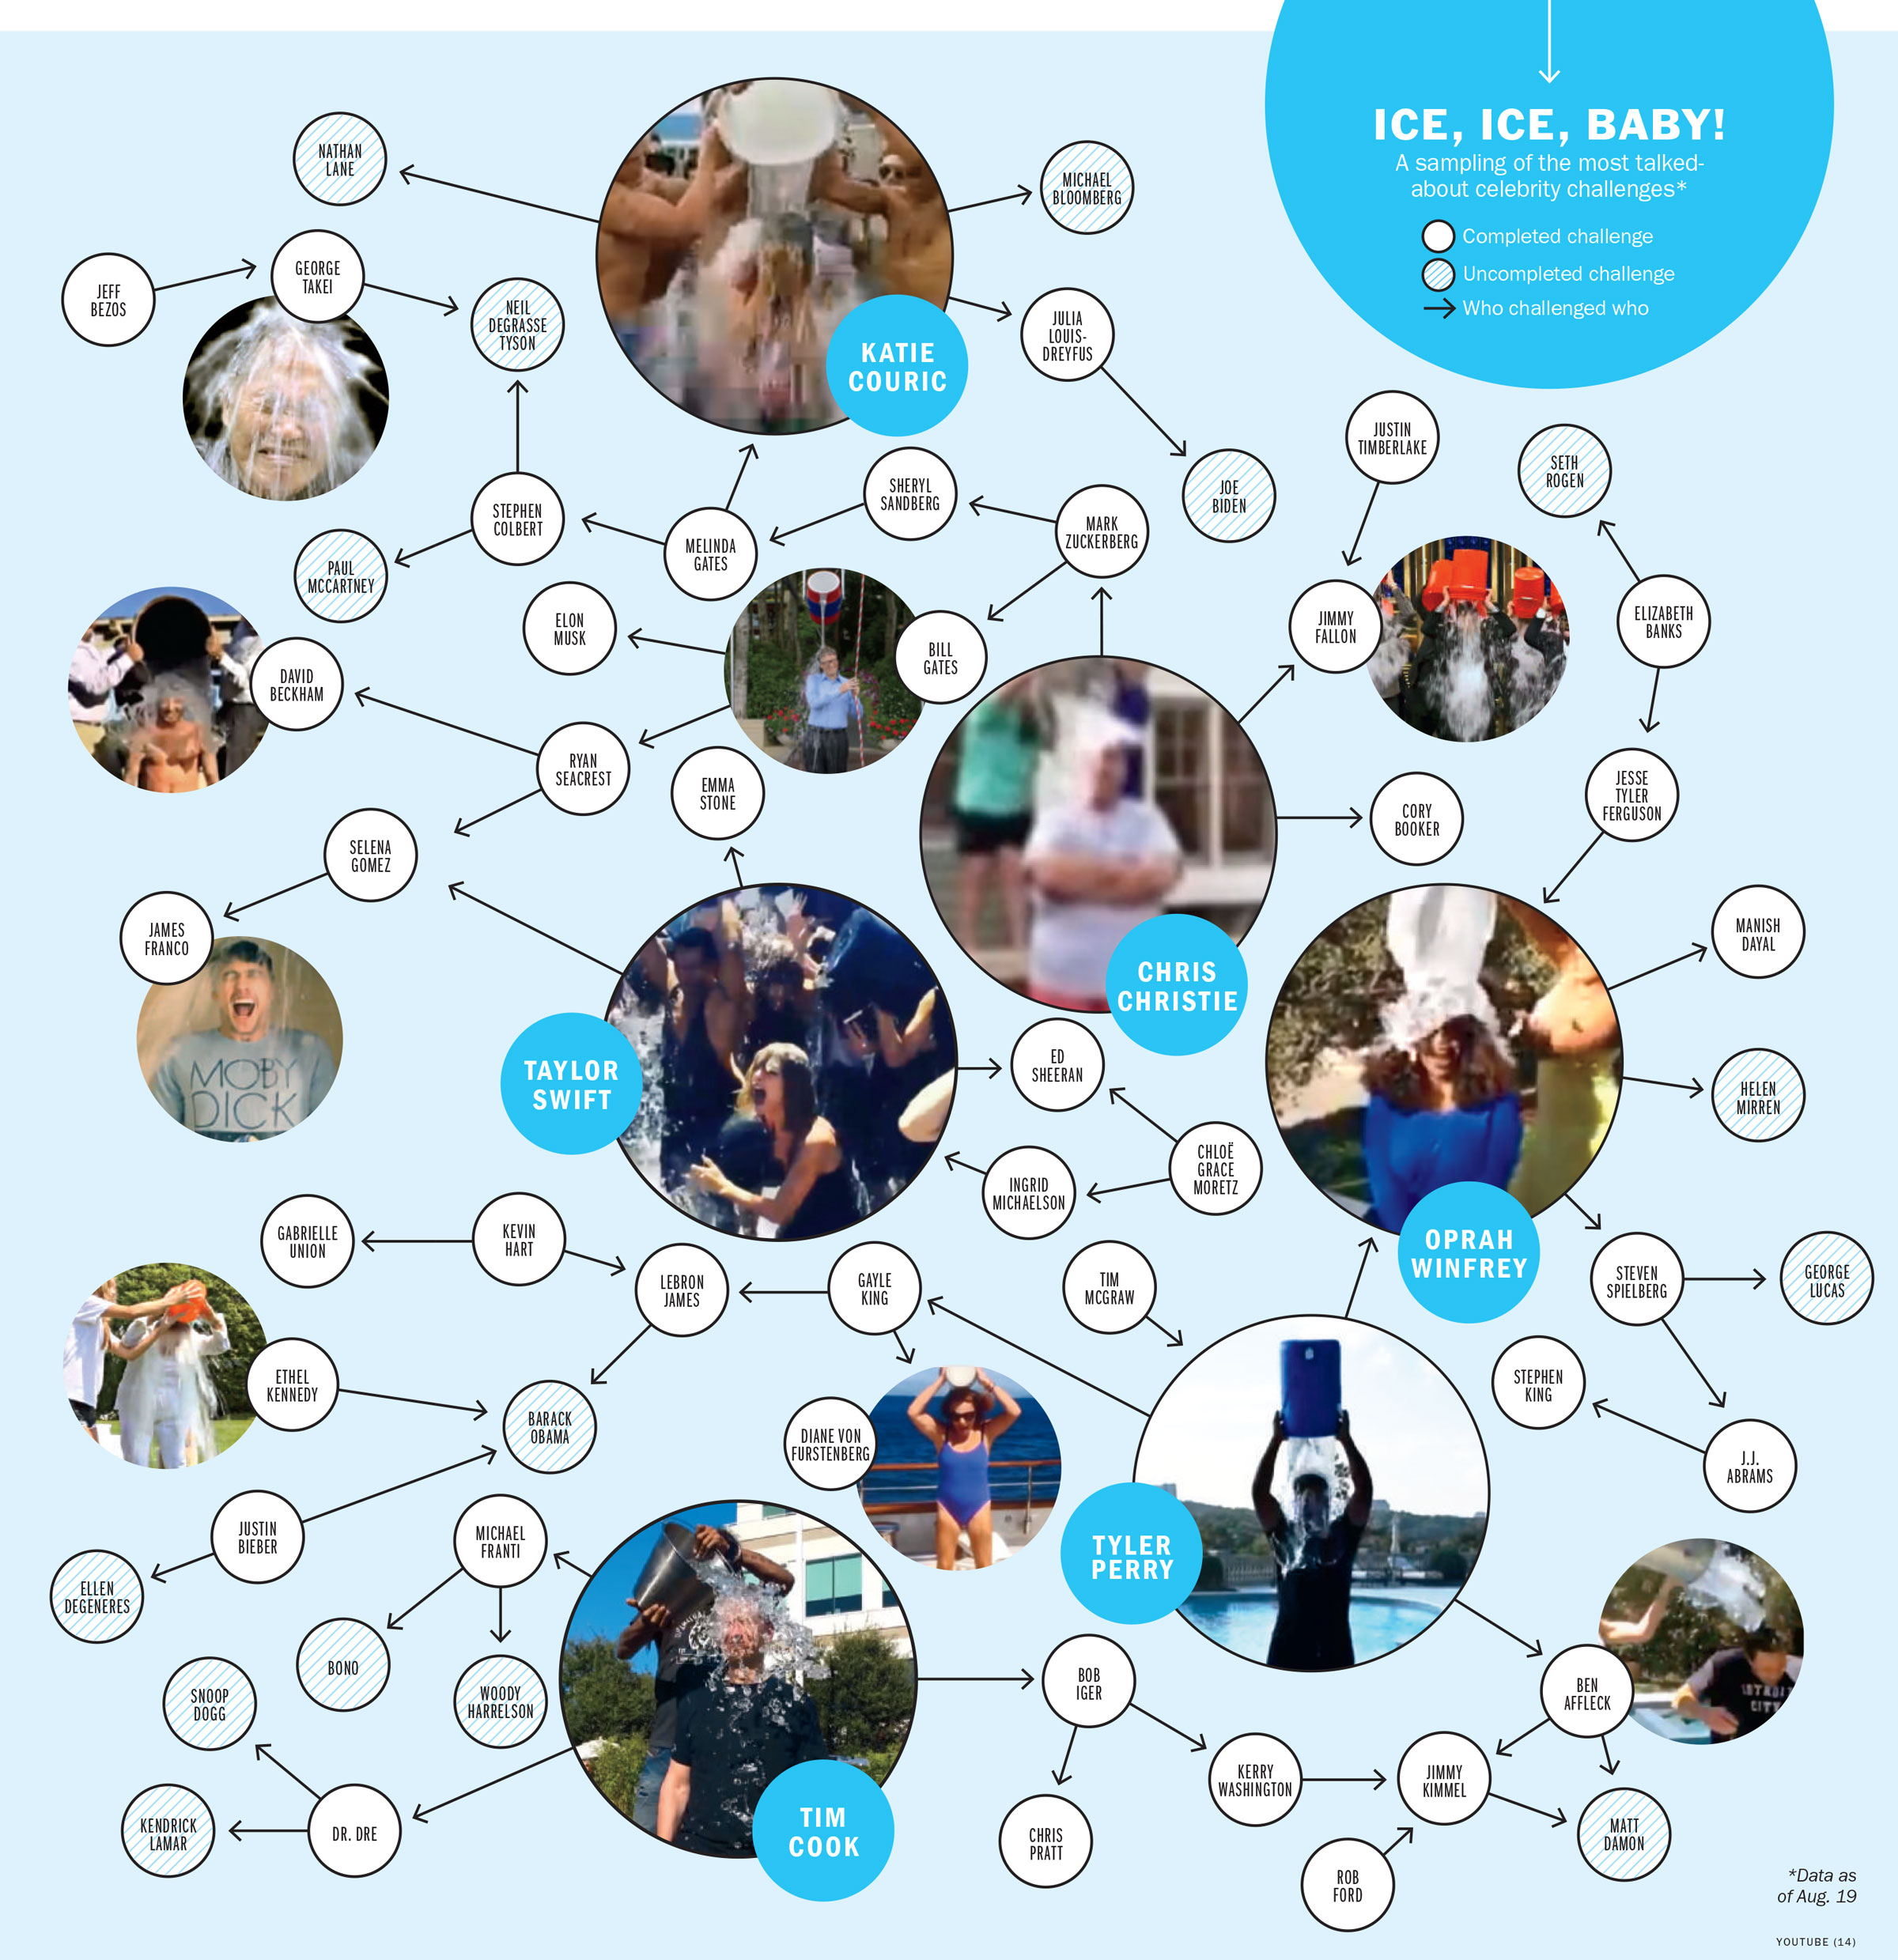 IMAGE VIA: 'Explore the Tangled Web of Celebrity Ice Bucket Challenges' TIME,  2014/8/21